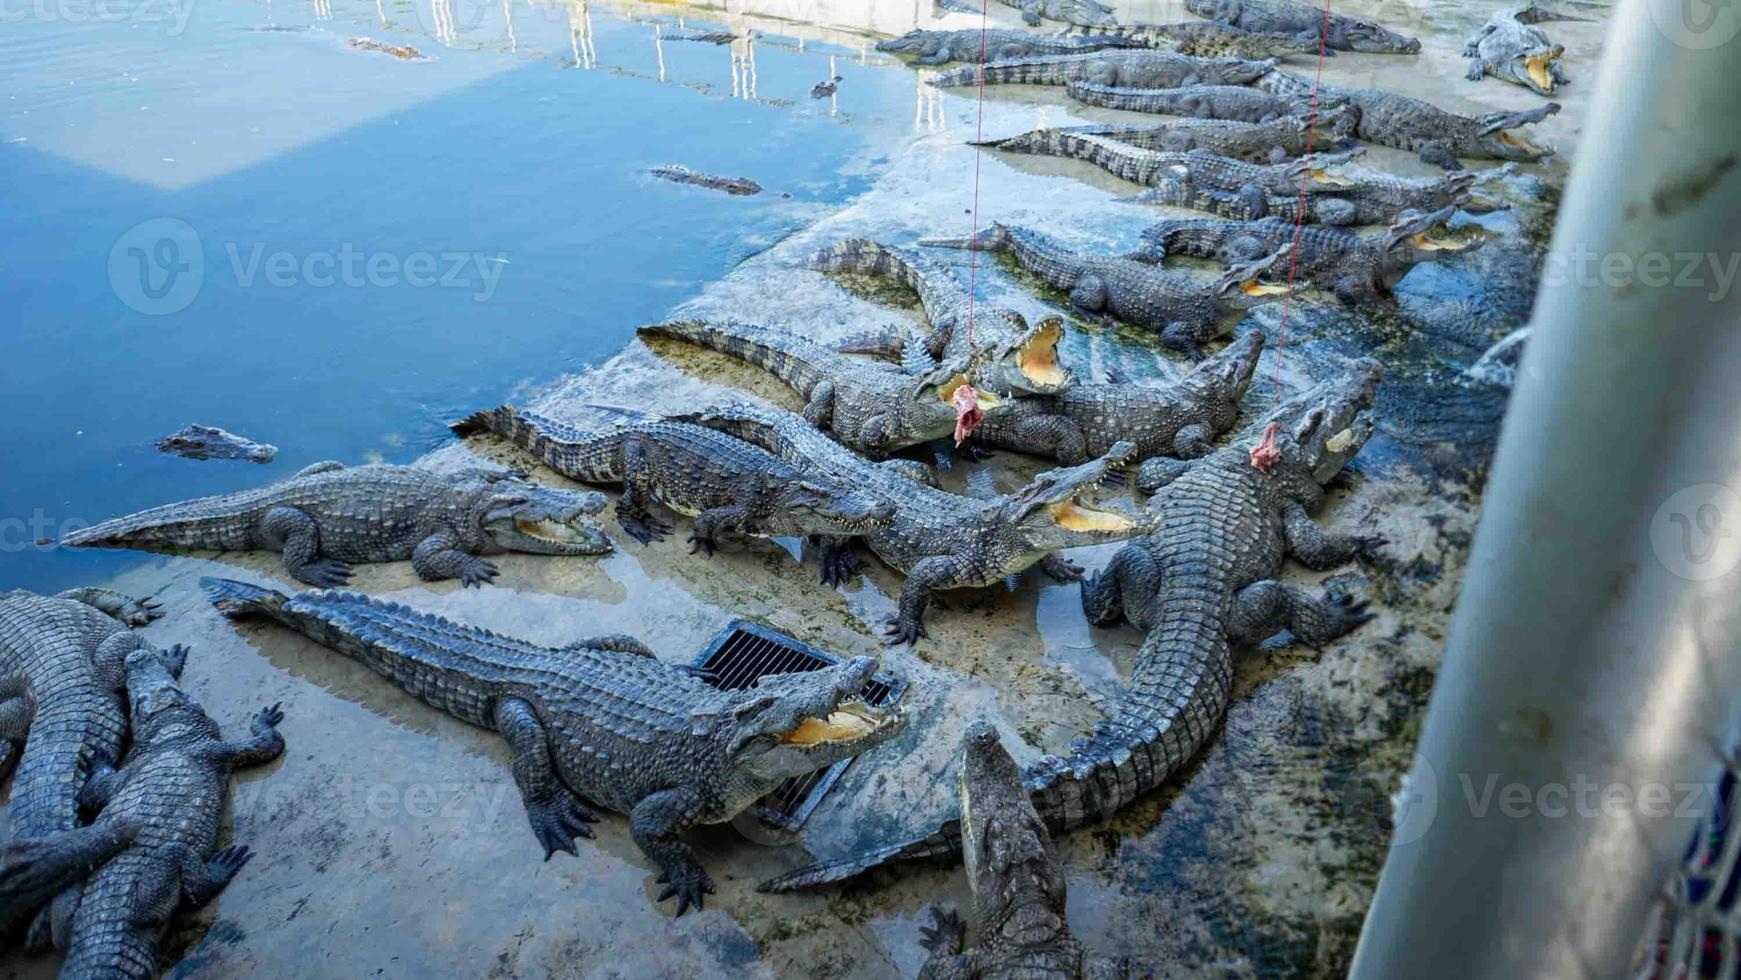 Several large crocodiles were hungry for food photo